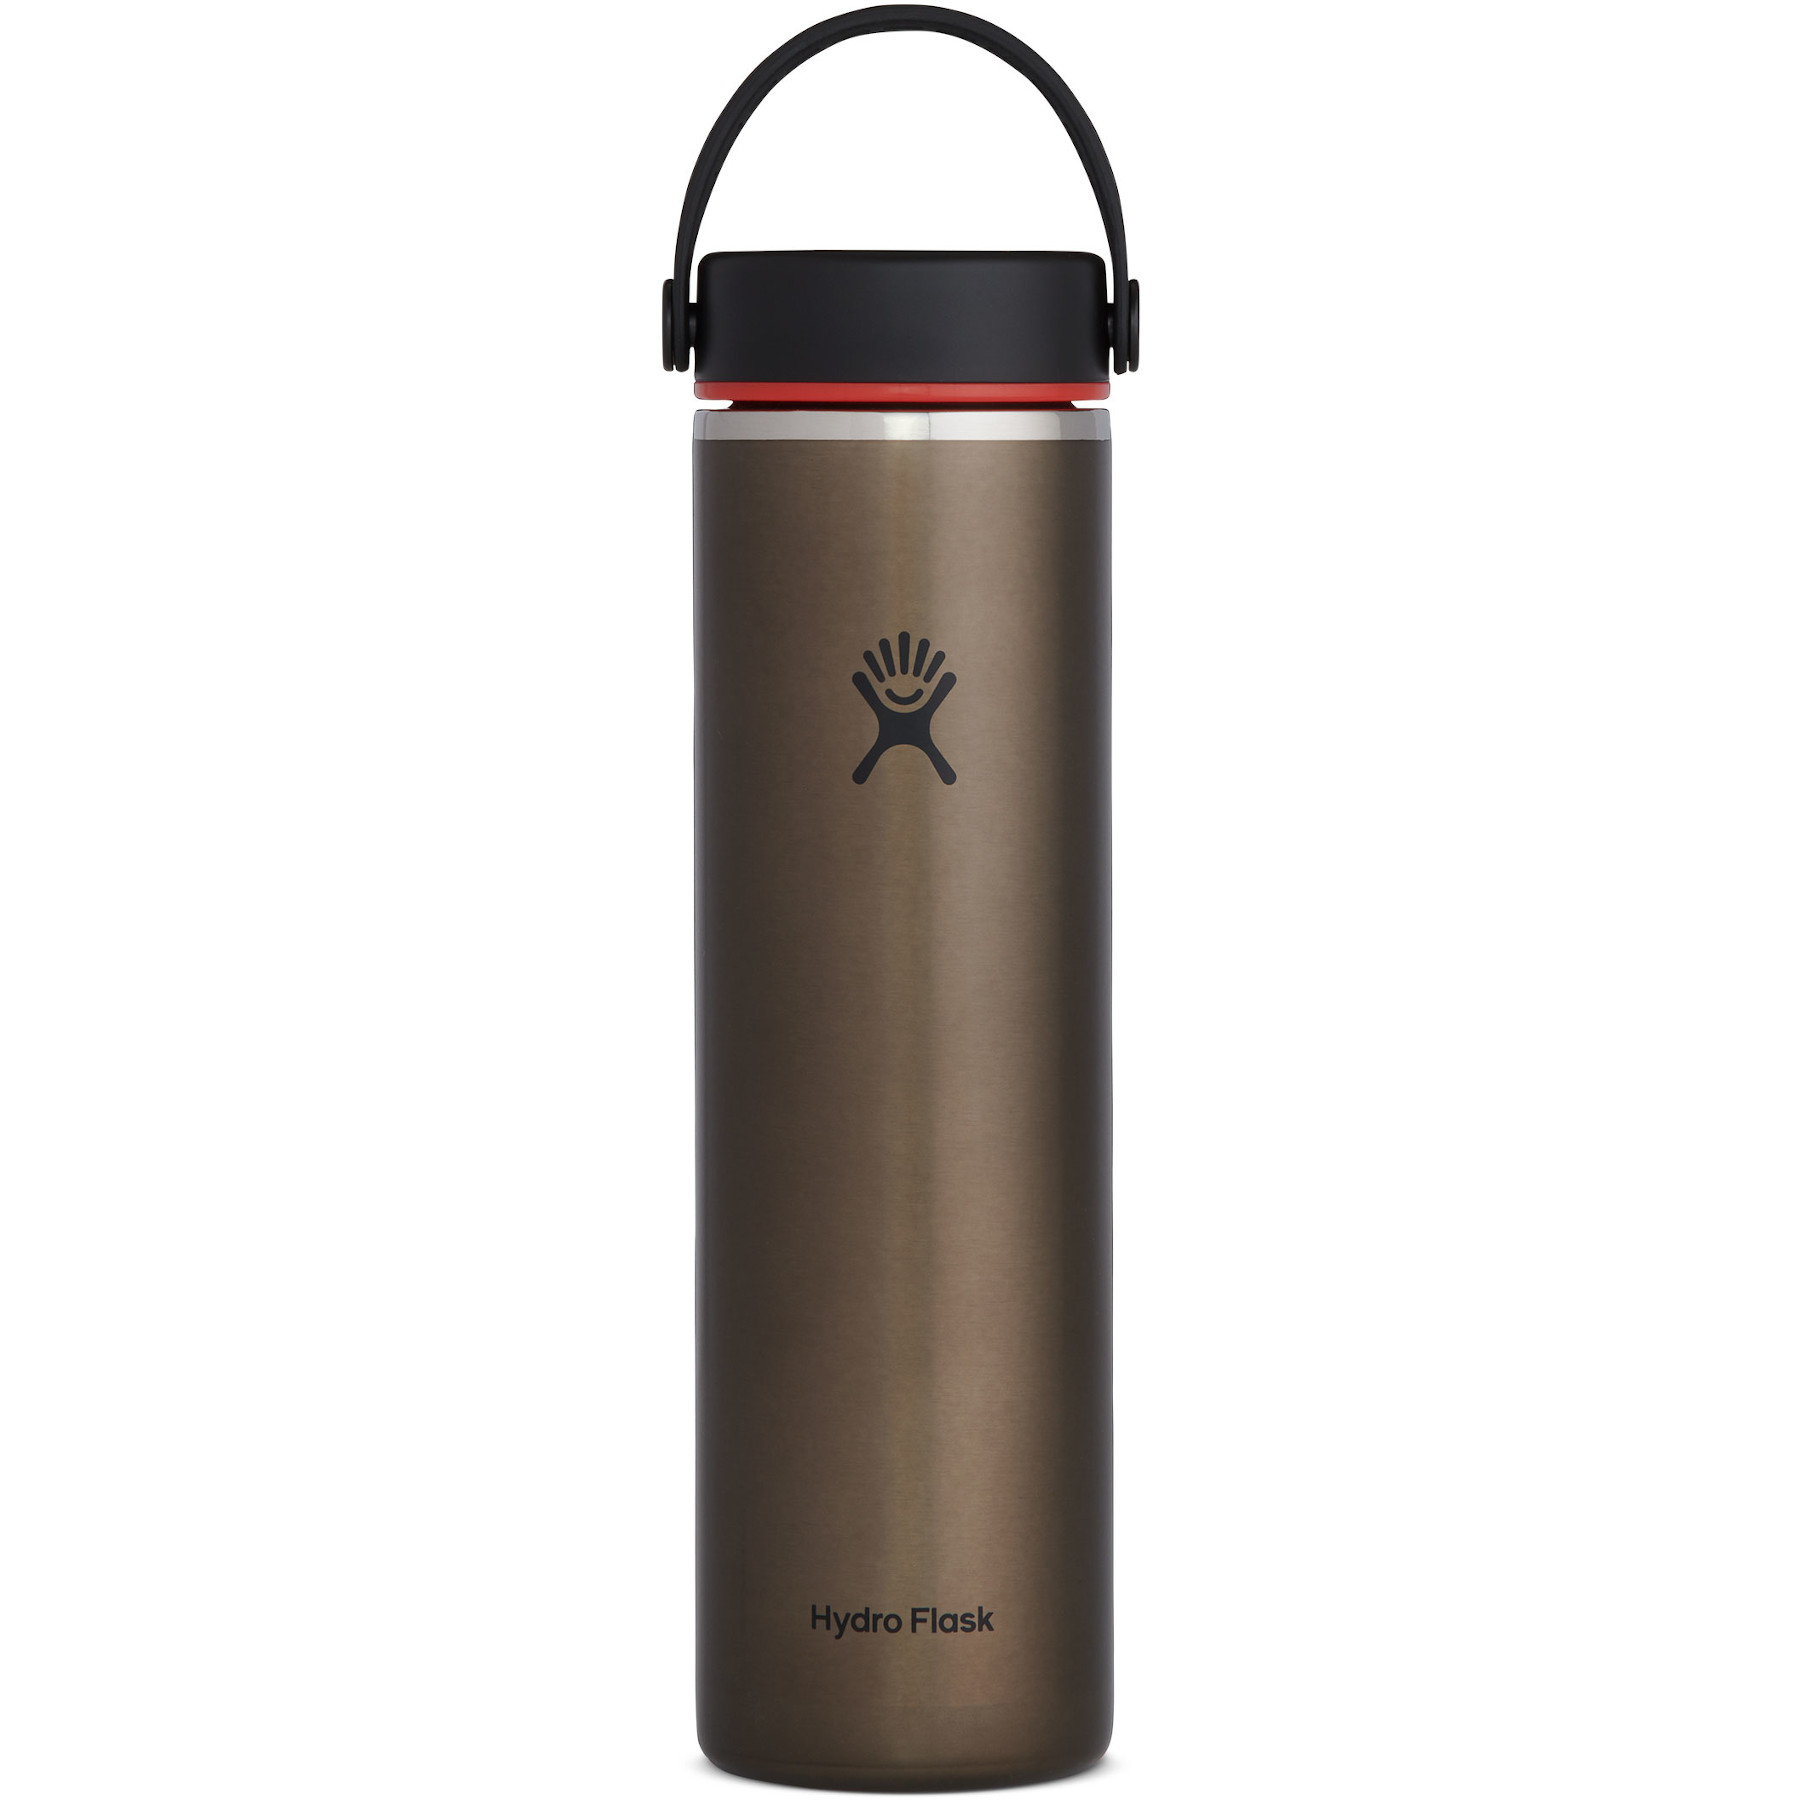 Productfoto van Hydro Flask 24 oz Lightweight Wide Mouth Trail Series - Insulated Bottle - 710 ml - Obsidian